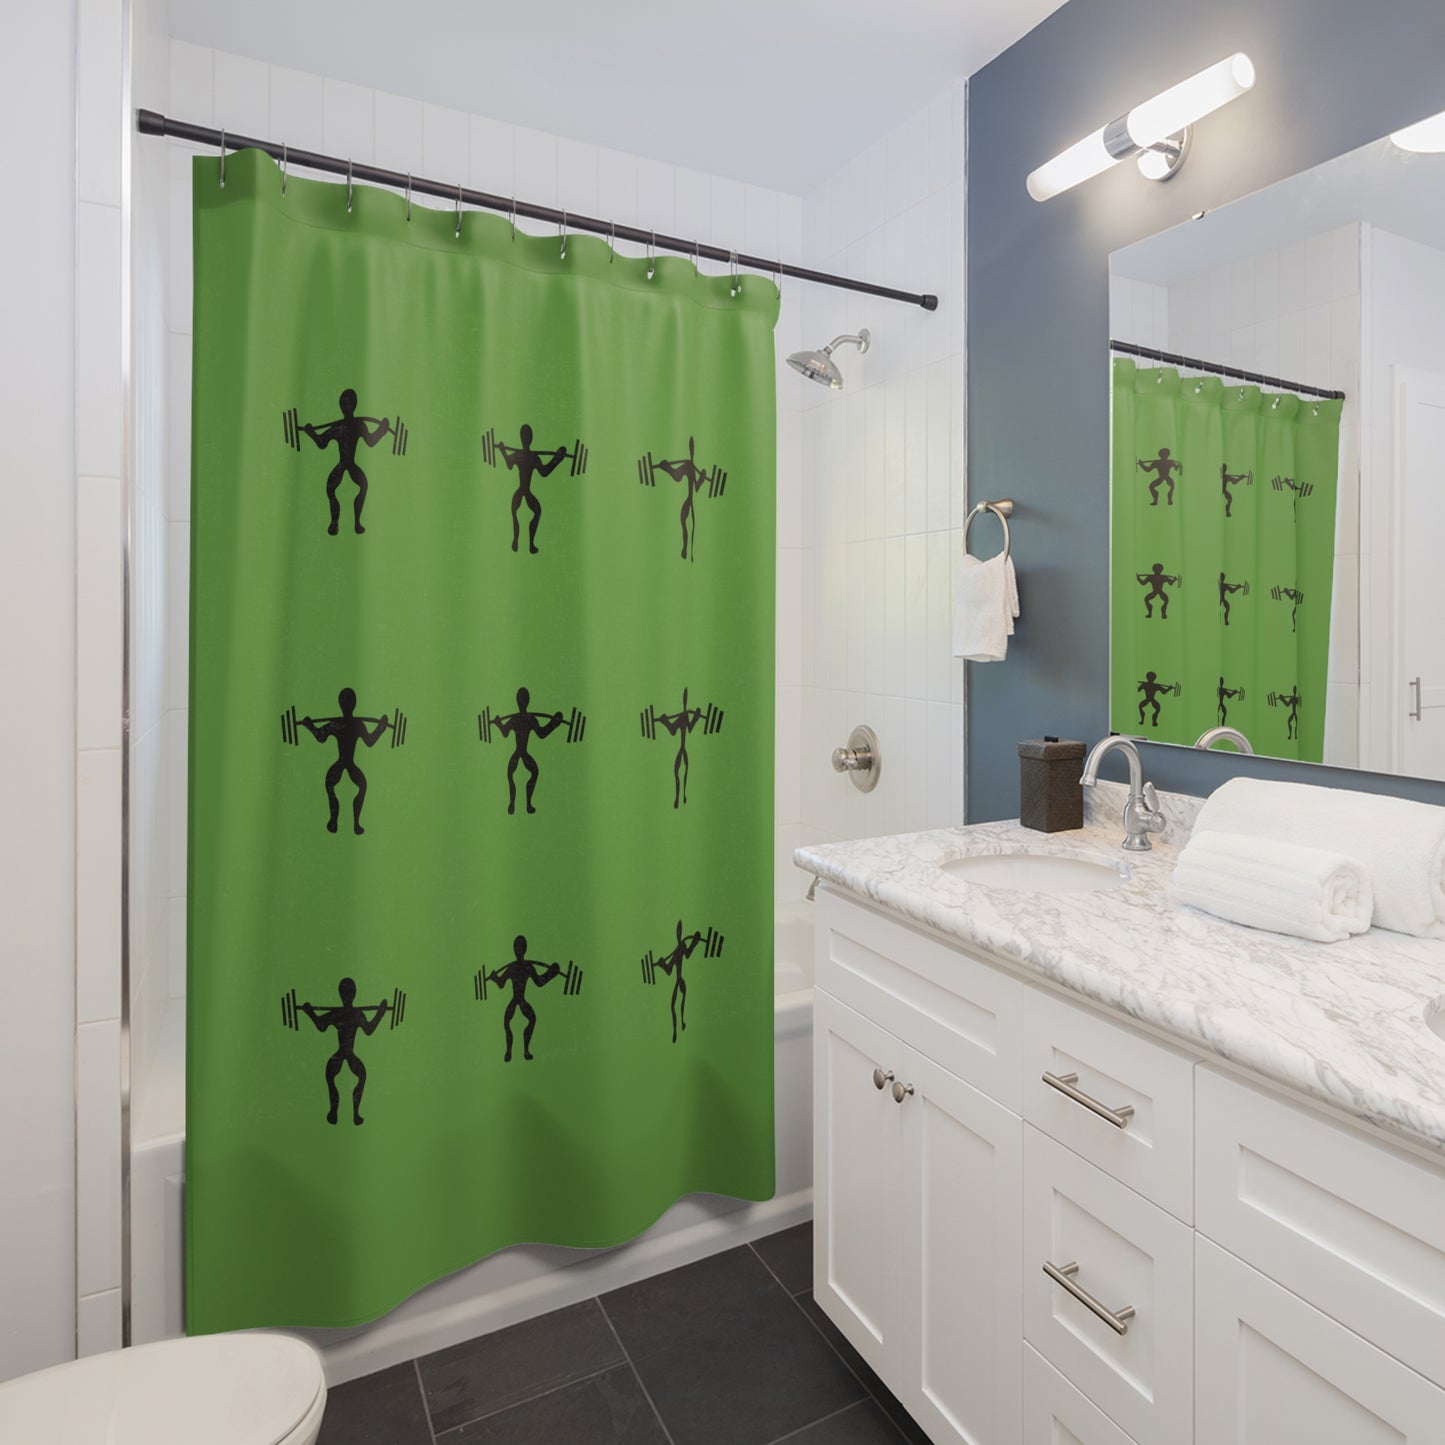 Shower Curtains: #2 Weightlifting Green